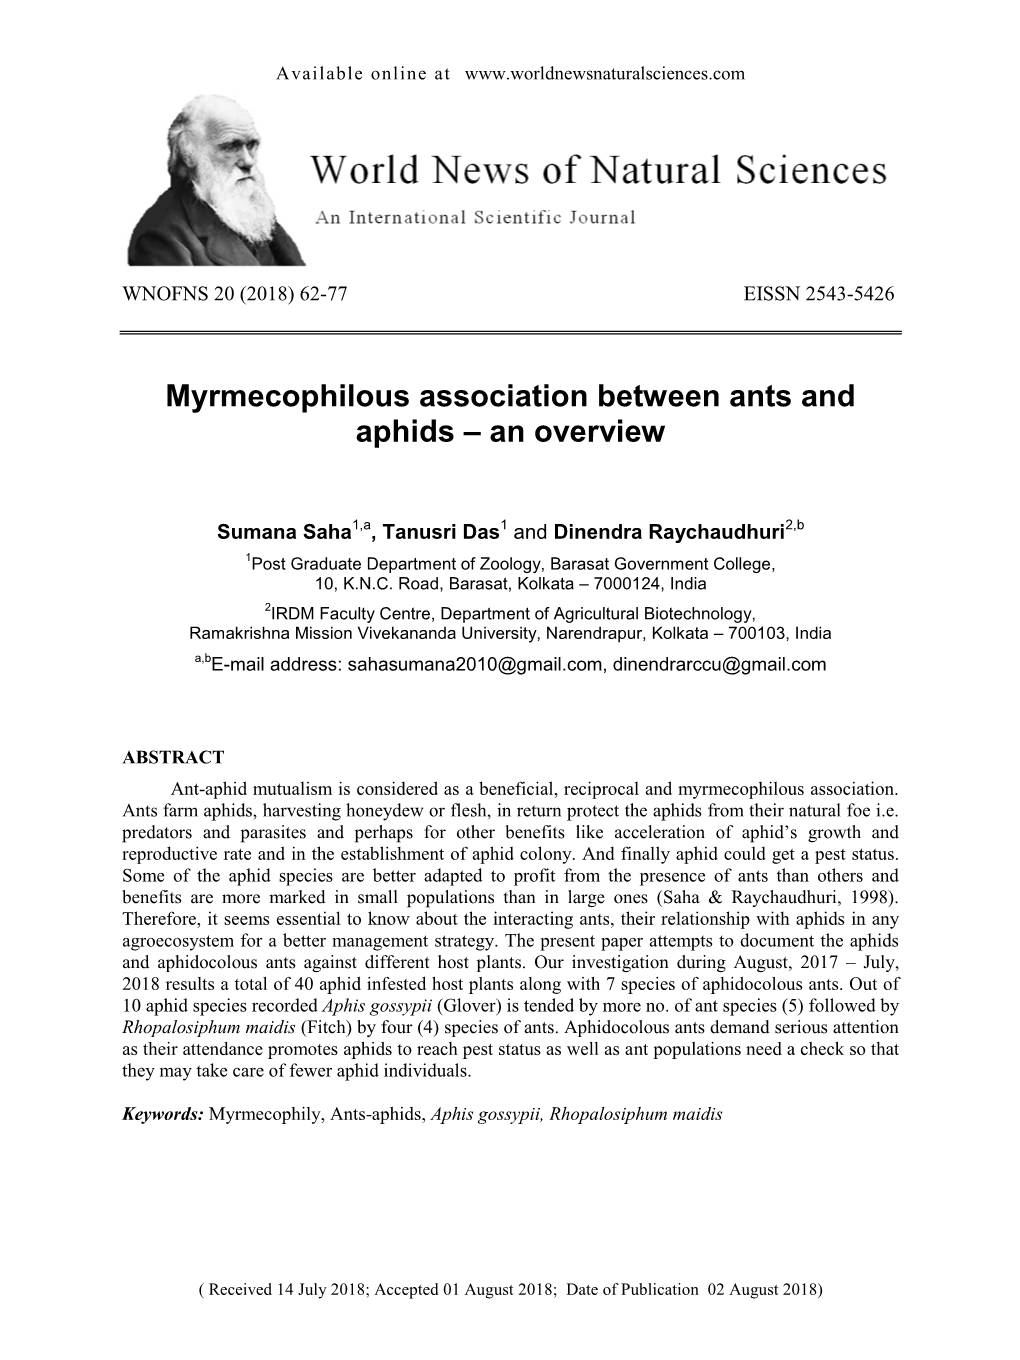 Myrmecophilous Association Between Ants and Aphids – an Overview